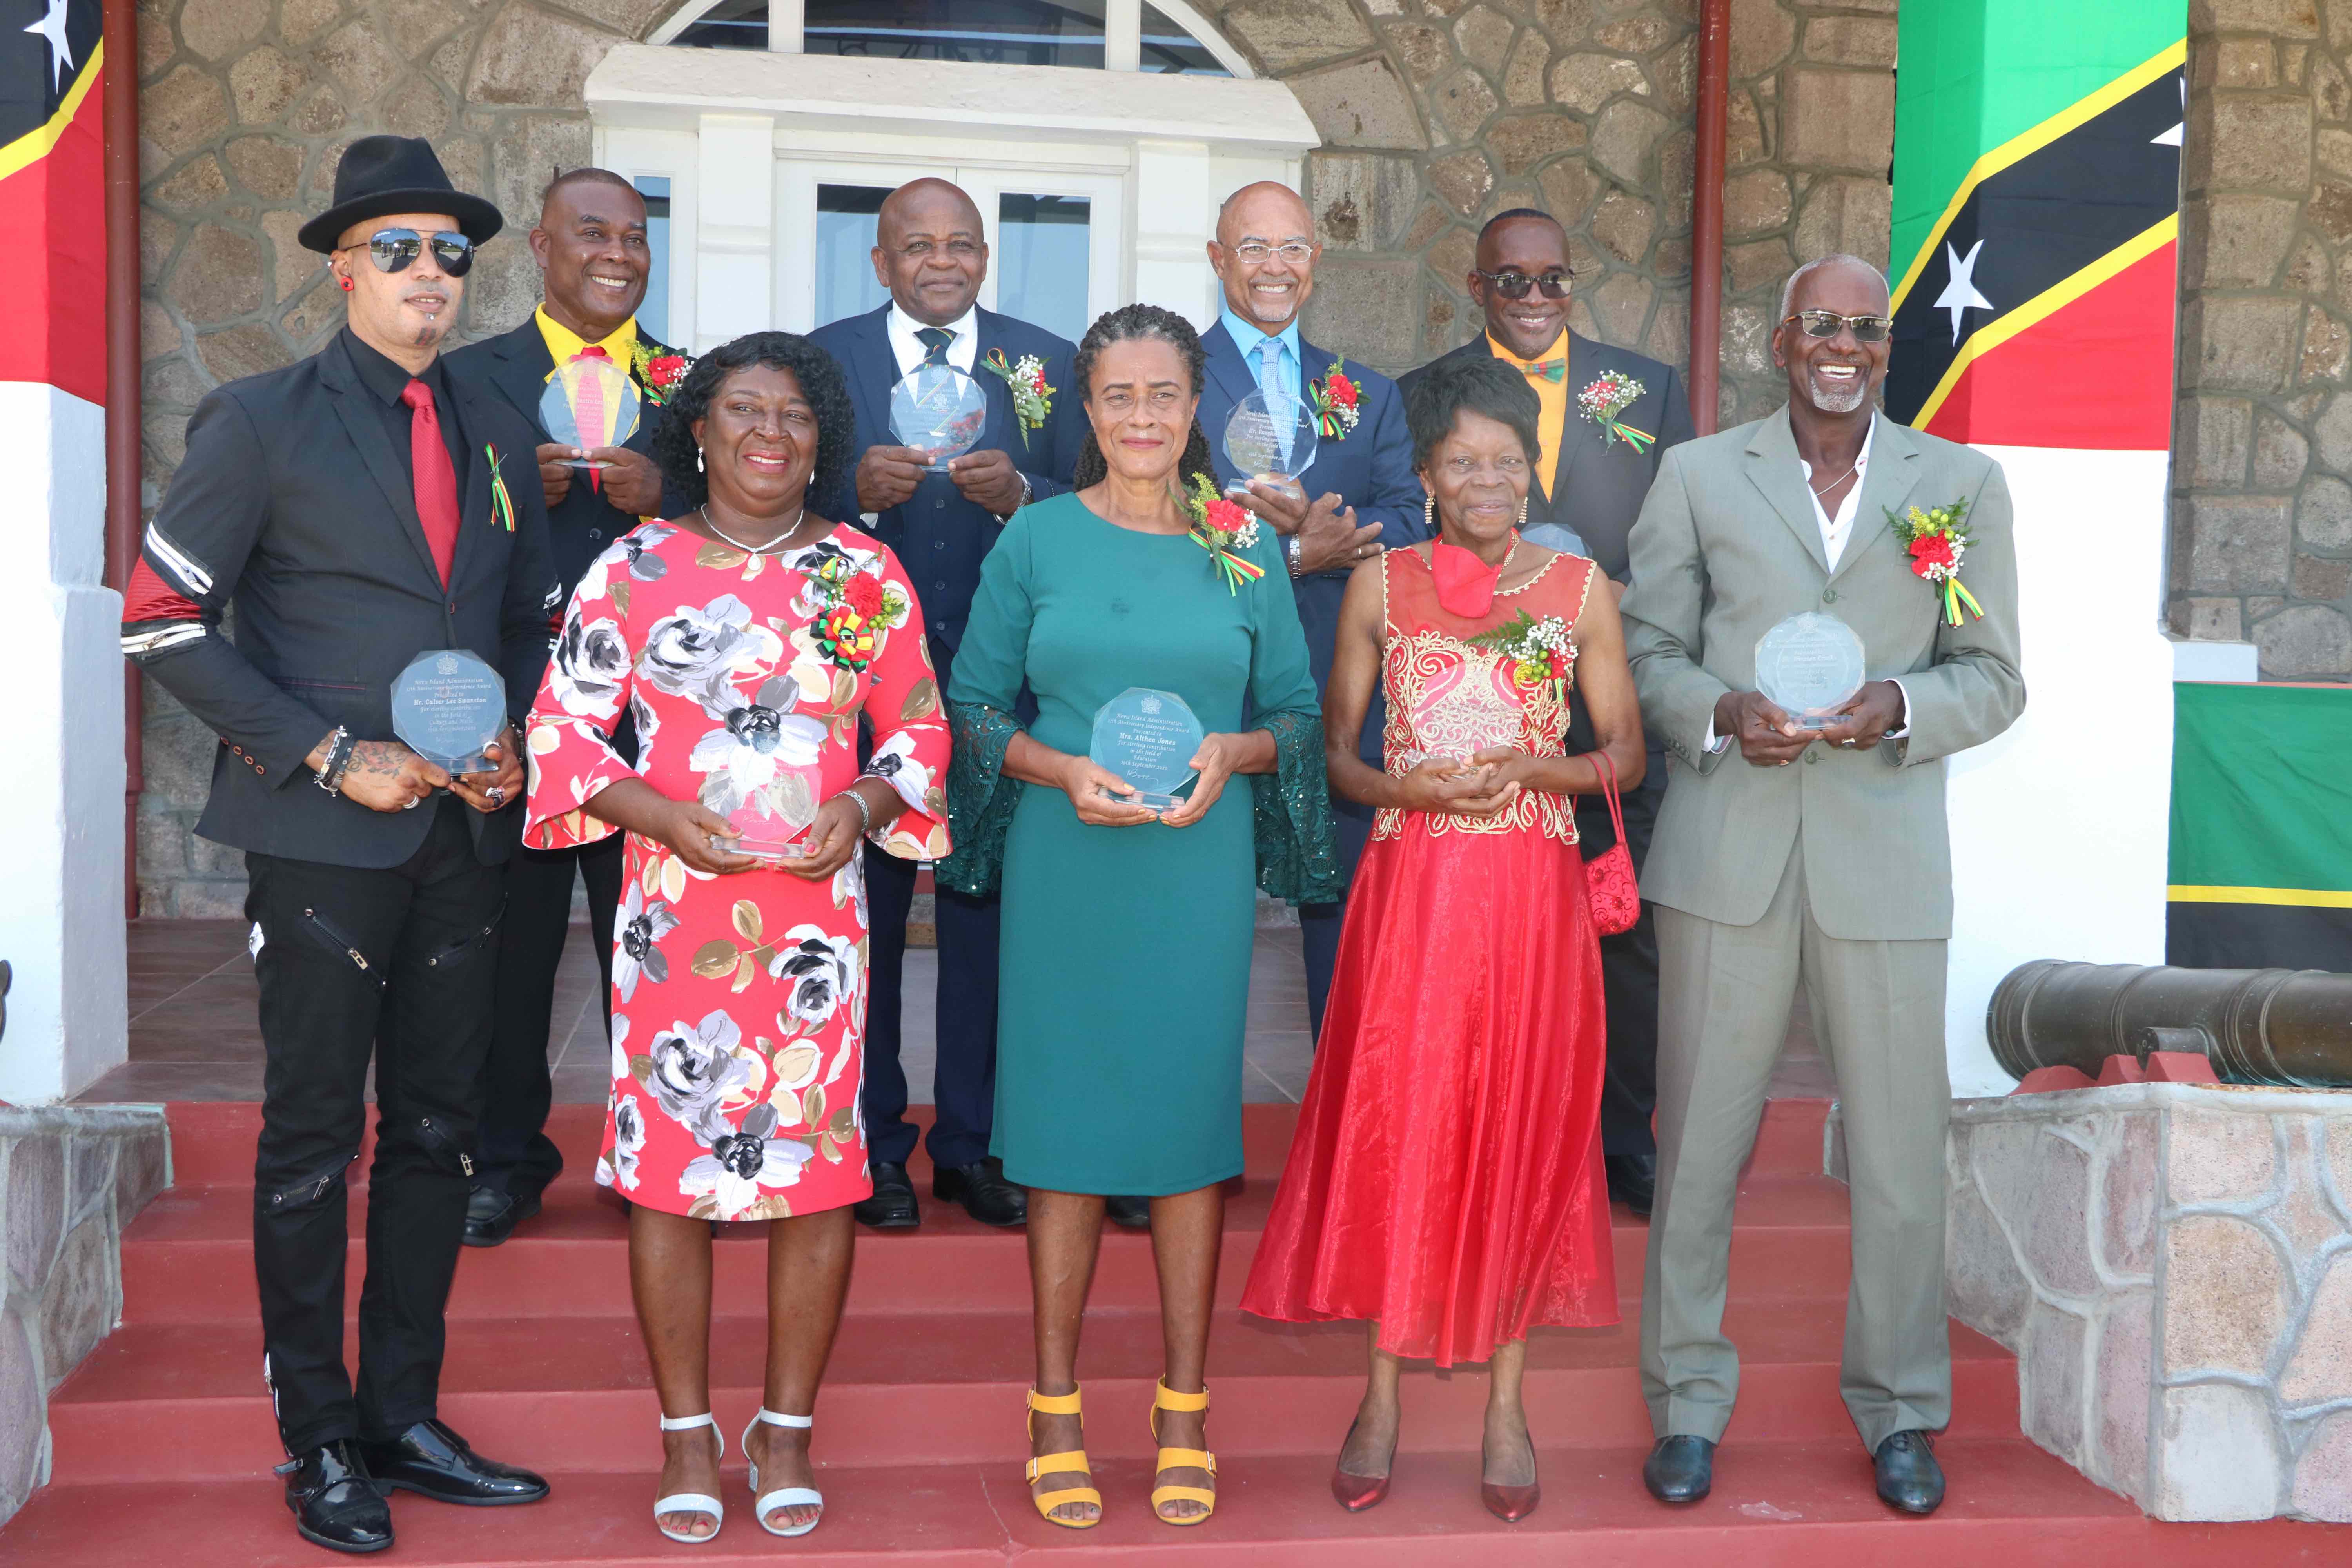 Nine of the 10 awardees showing off their awards on the steps of the picturesque Government House at Belle Vue, moments after they received their Independence Day Awards from Her Honour Mrs. Hyleeta Liburd, Deputy Governor General on Nevis on September 19, 2020. Back row: (l-r) Mr. Austin Lescott; Captain James Greene; Mr. Vaughn Anslyn; and Mr. Oscar “Astro” Browne. Front row: (l-r) Mr. Calver Lee “Gharlic” Swanston; Ms. Laurel Smithen; Mrs. Althea E. Jones; Ms. Thelma E. Hunkins; and Mr. Winston Crooke